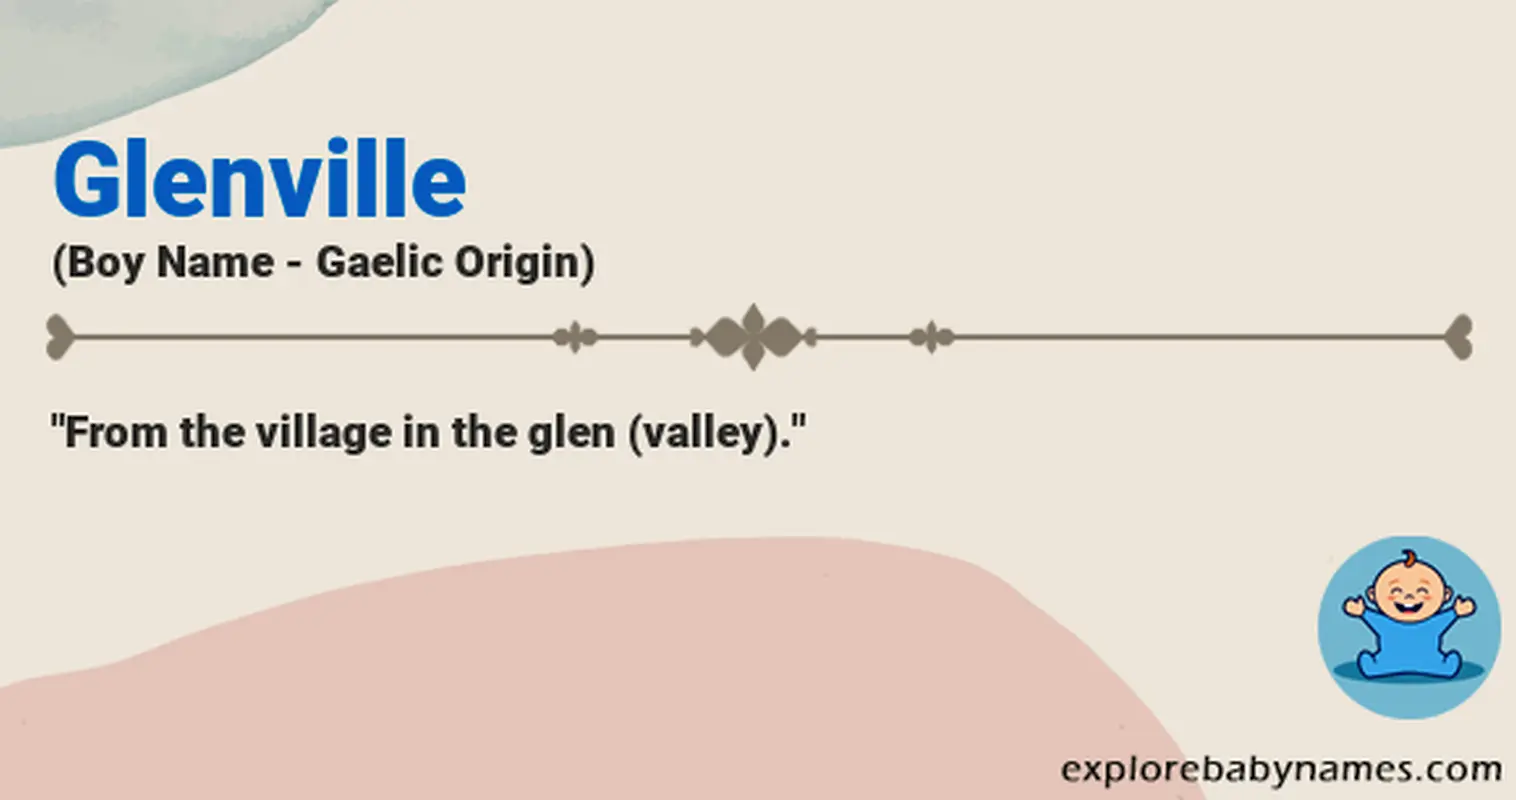 Meaning of Glenville